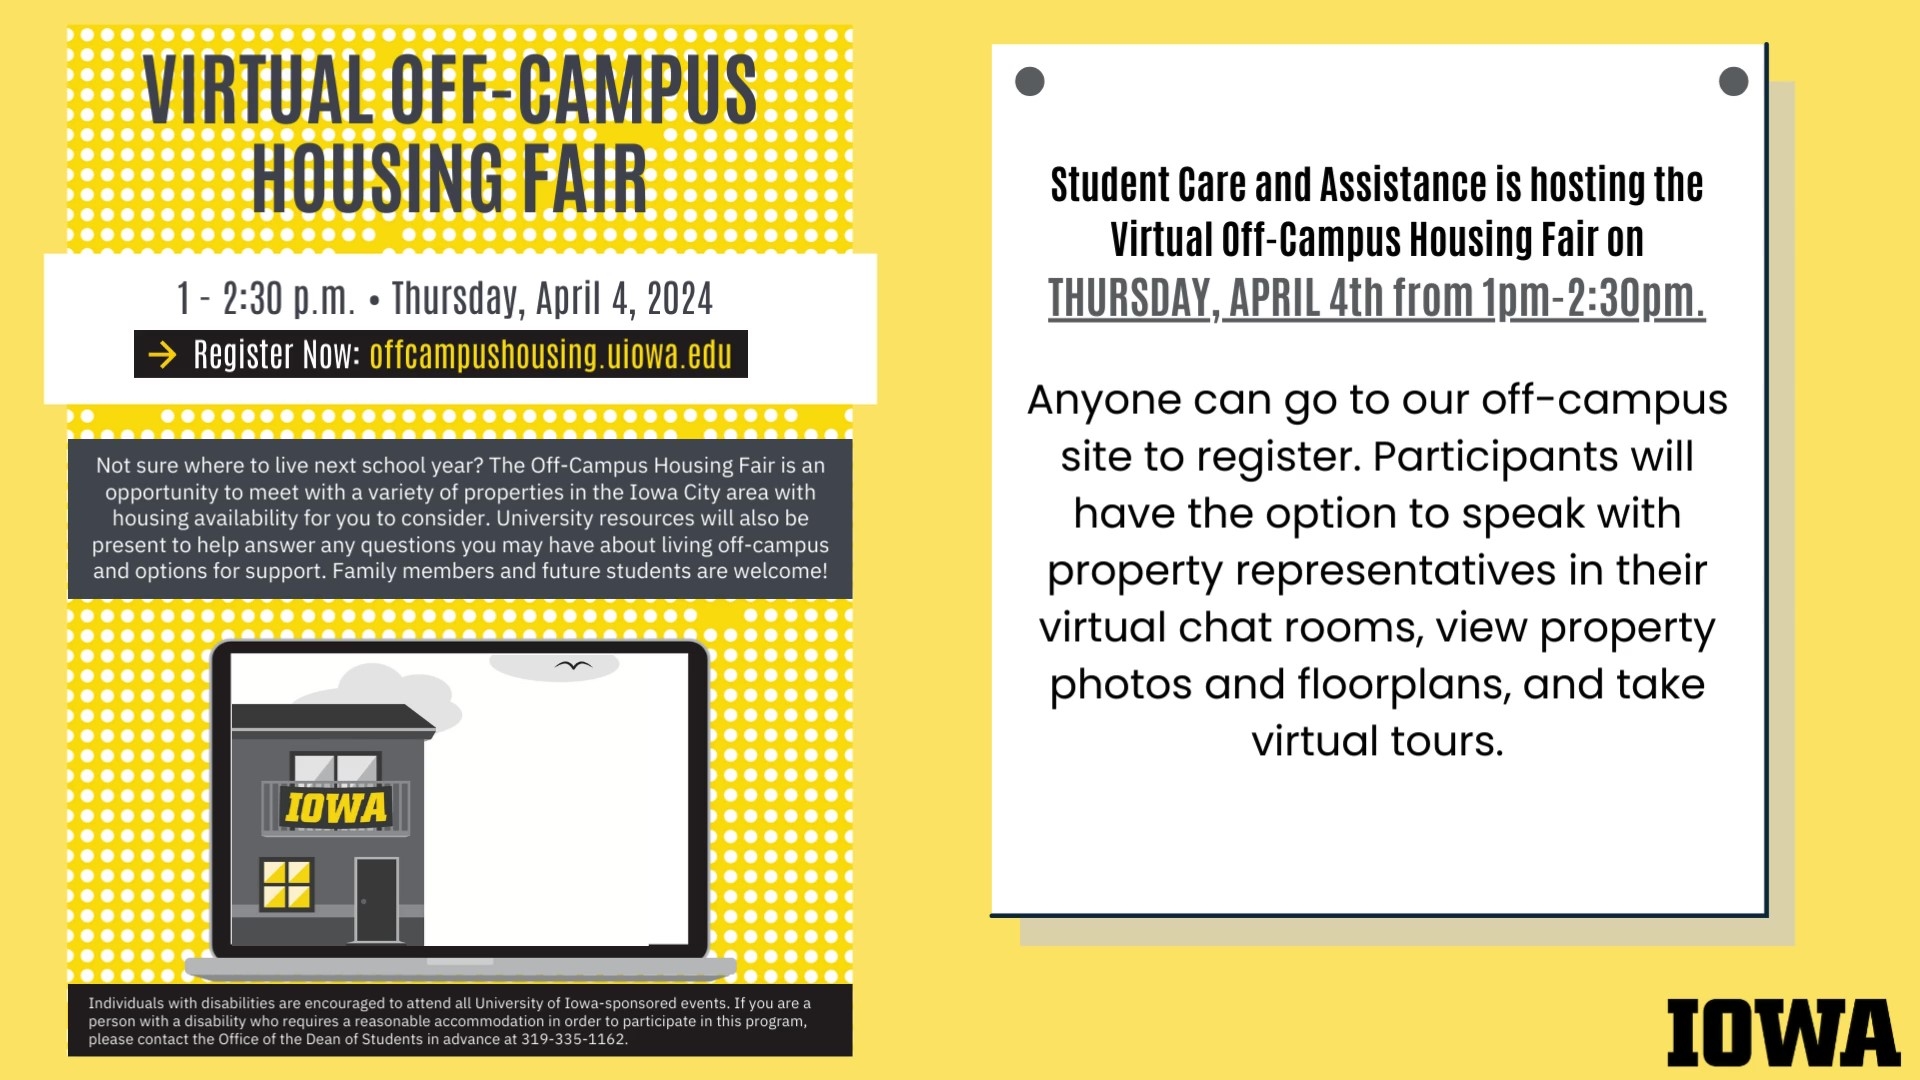 Student Care and Assistance is hosting the Virtual Off-Campus Housing Fair on Thursday, April 4th, from 1pm to 2:30pm.